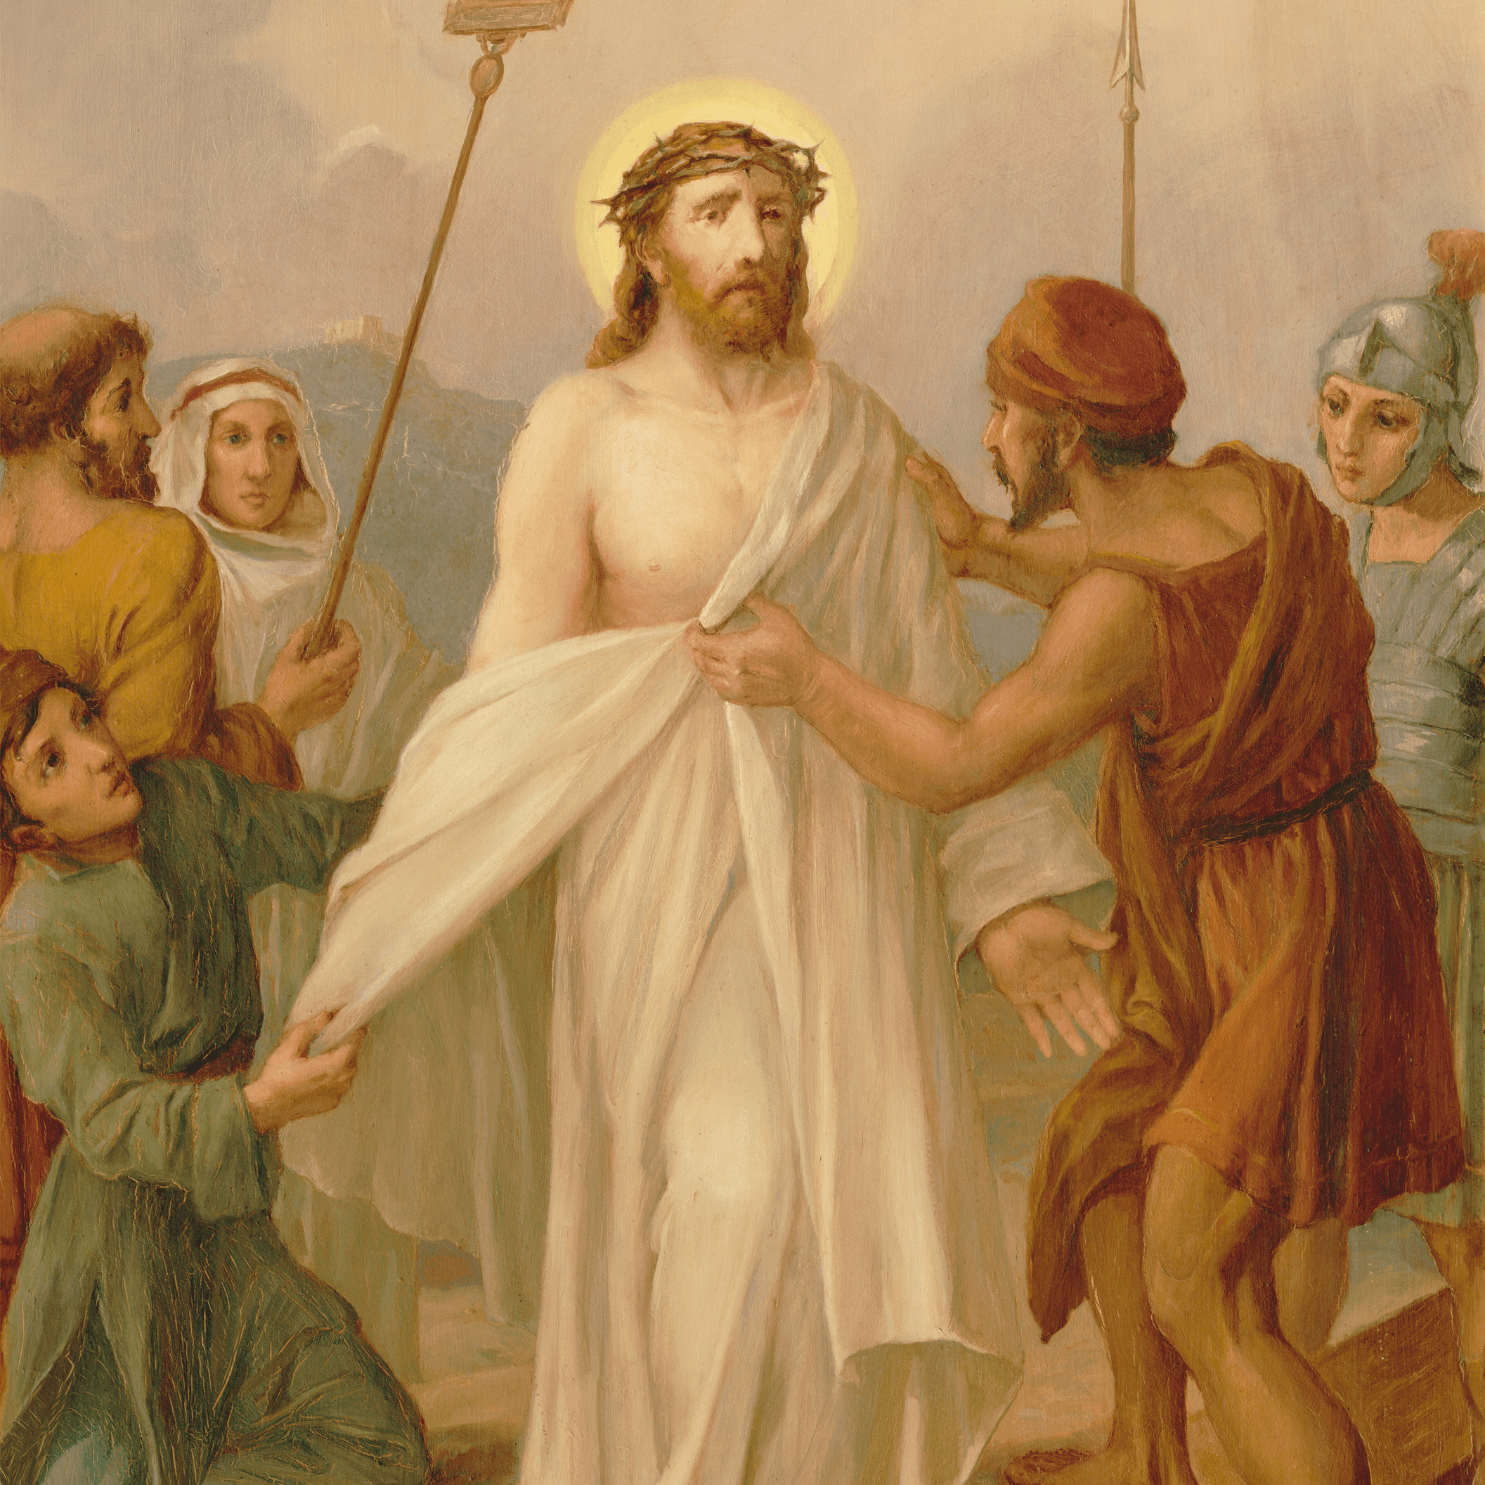 The Way of the Cross Tenth Station: Jesus is Stripped of His Garments